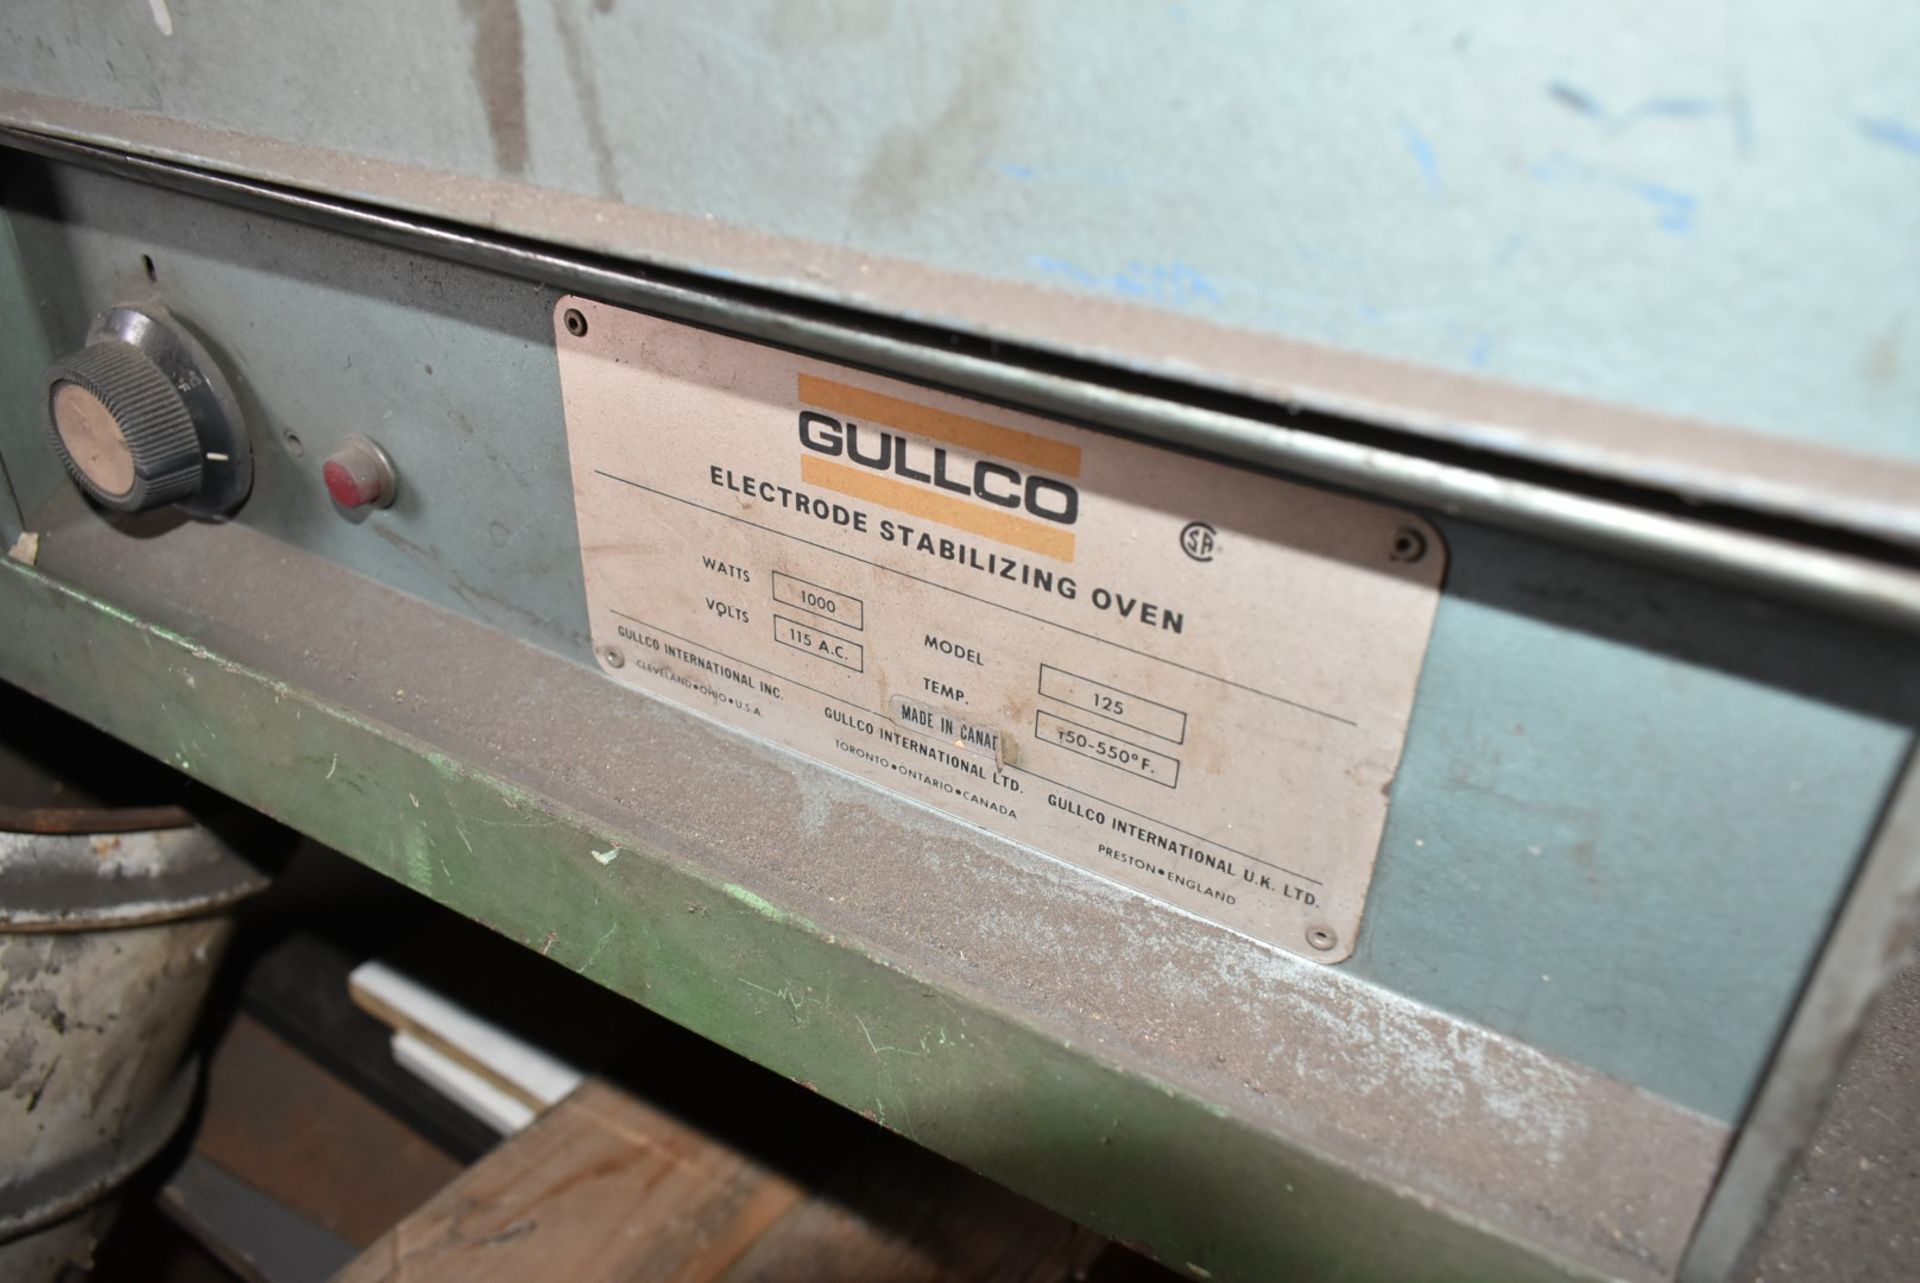 GULLCO MODEL 125 ELECTRODE STABILIZING OVEN WITH 550 DEG. F MAX. TEMPERATURE, S/N: N/A - Image 2 of 2